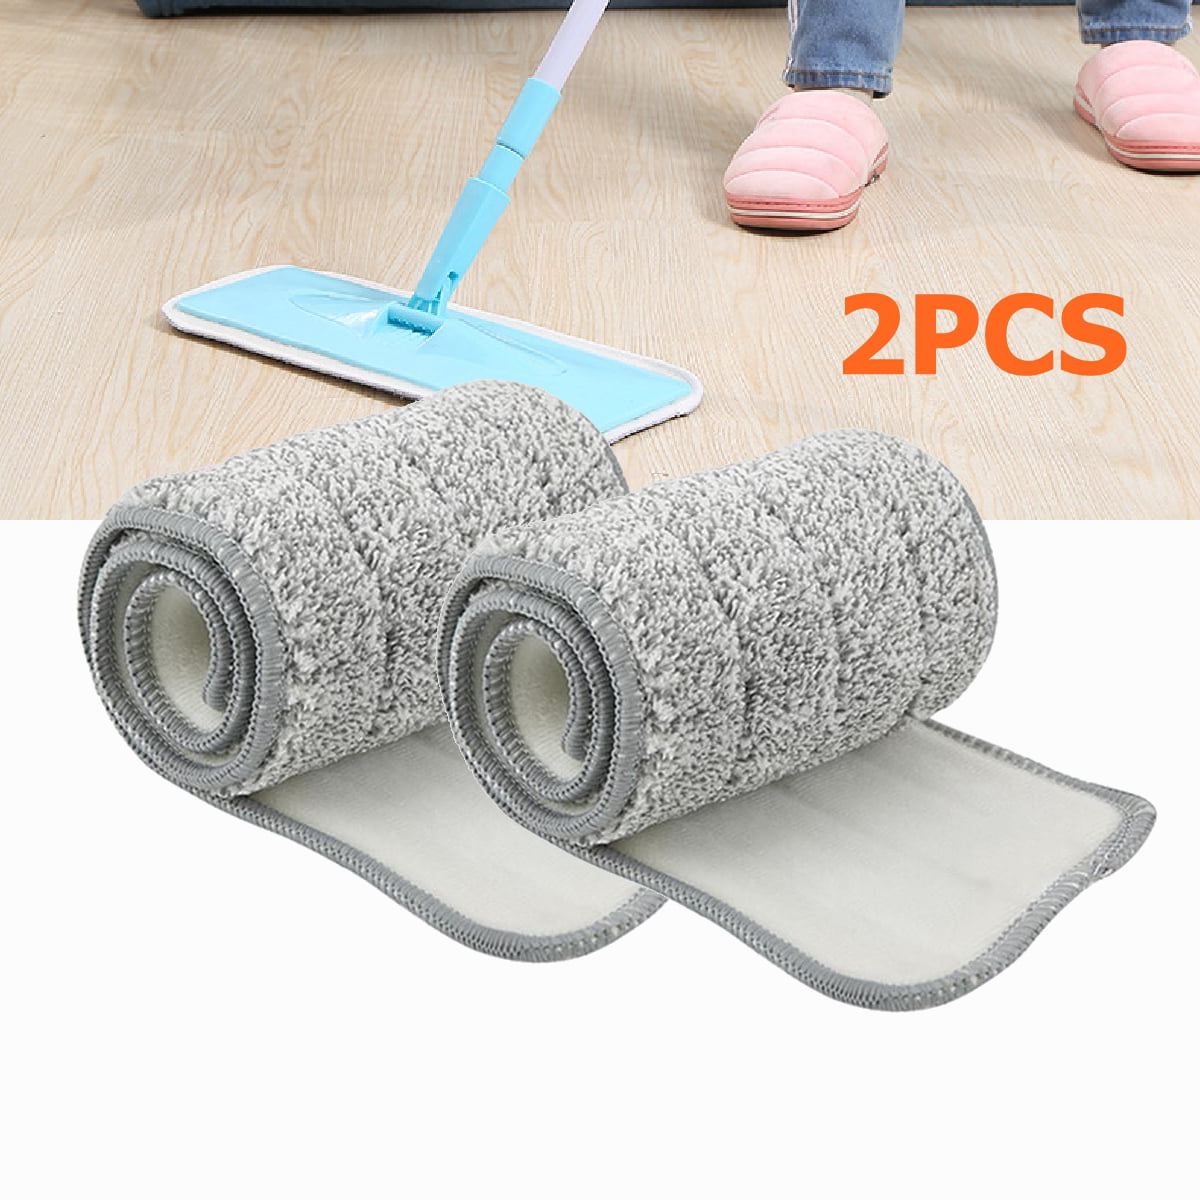 Microfiber Cleaning Pad Washable Dry Wet Mop Cloth Pad Parts for Bona Flat Mop 